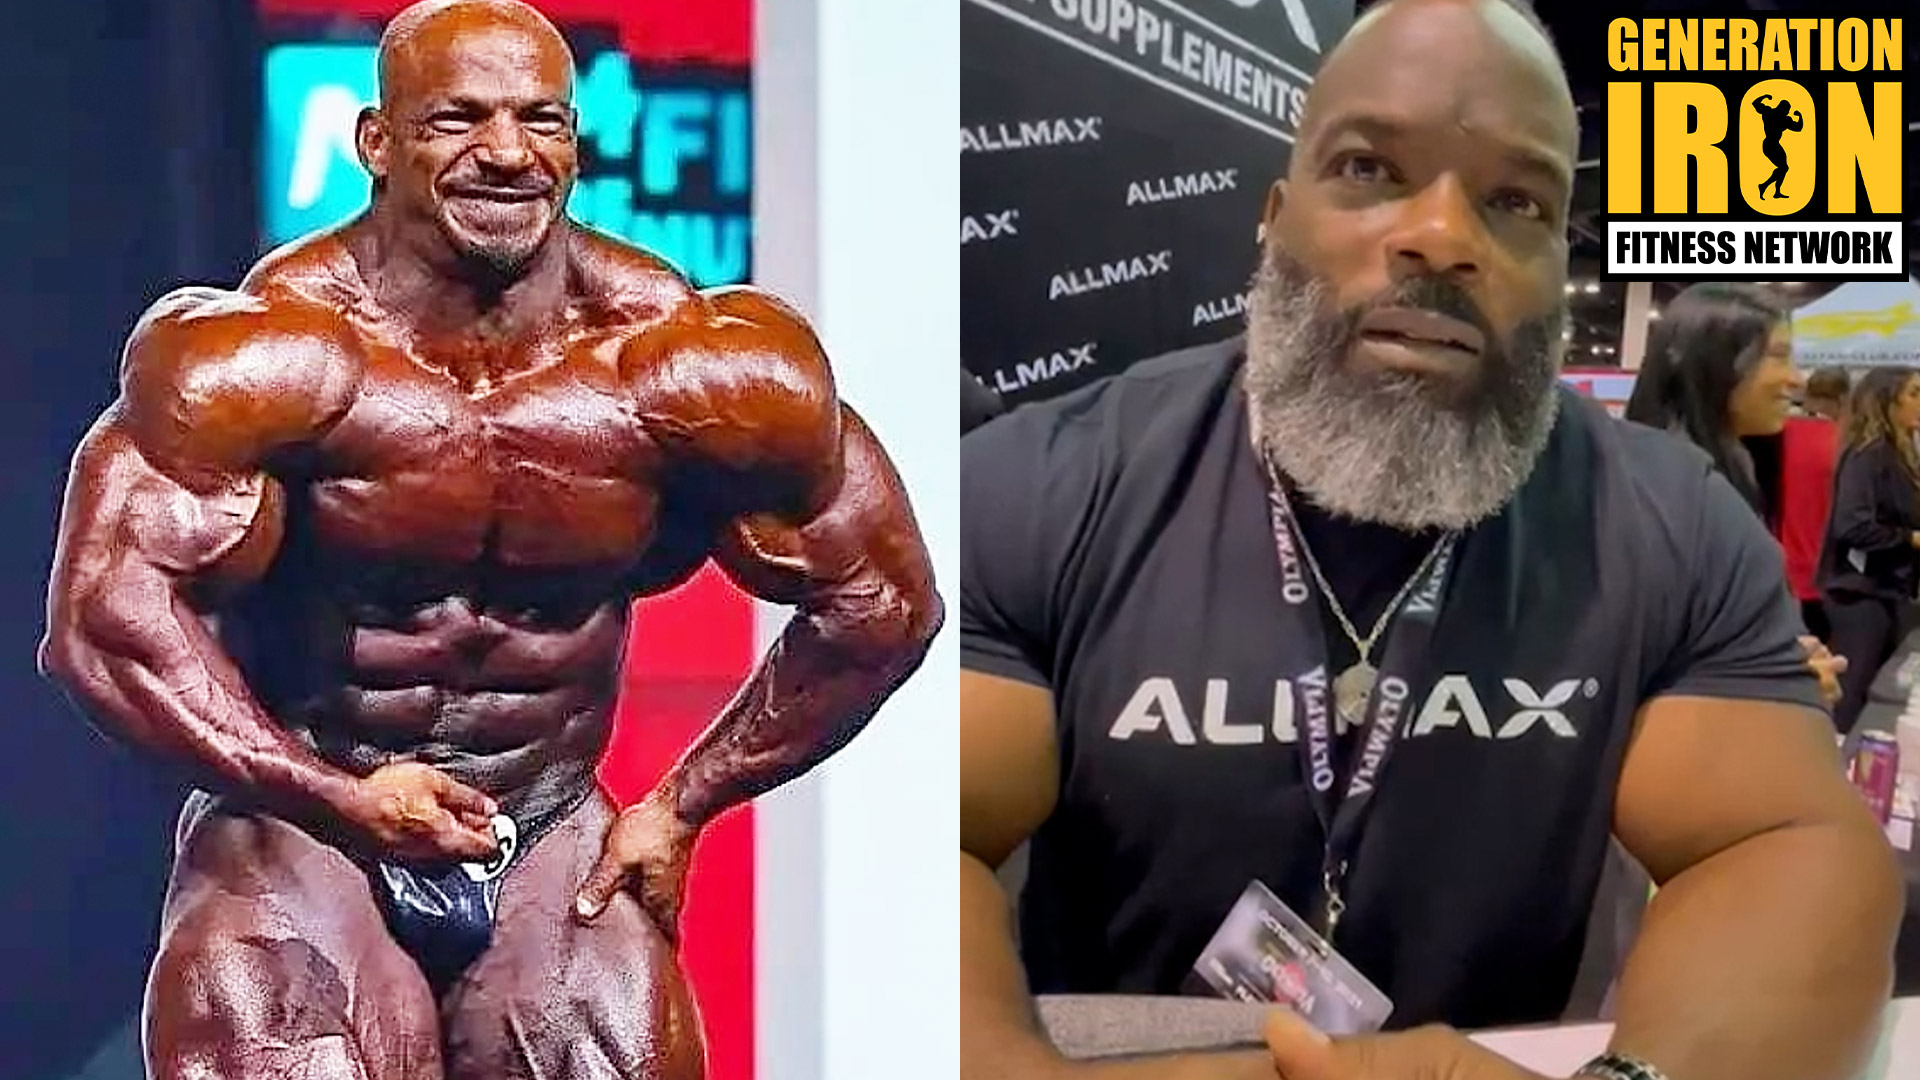 Johnnie O. Jackson: Big Ramy Will Comeback Sharper To Be The Clear Olympia 2021 Winner